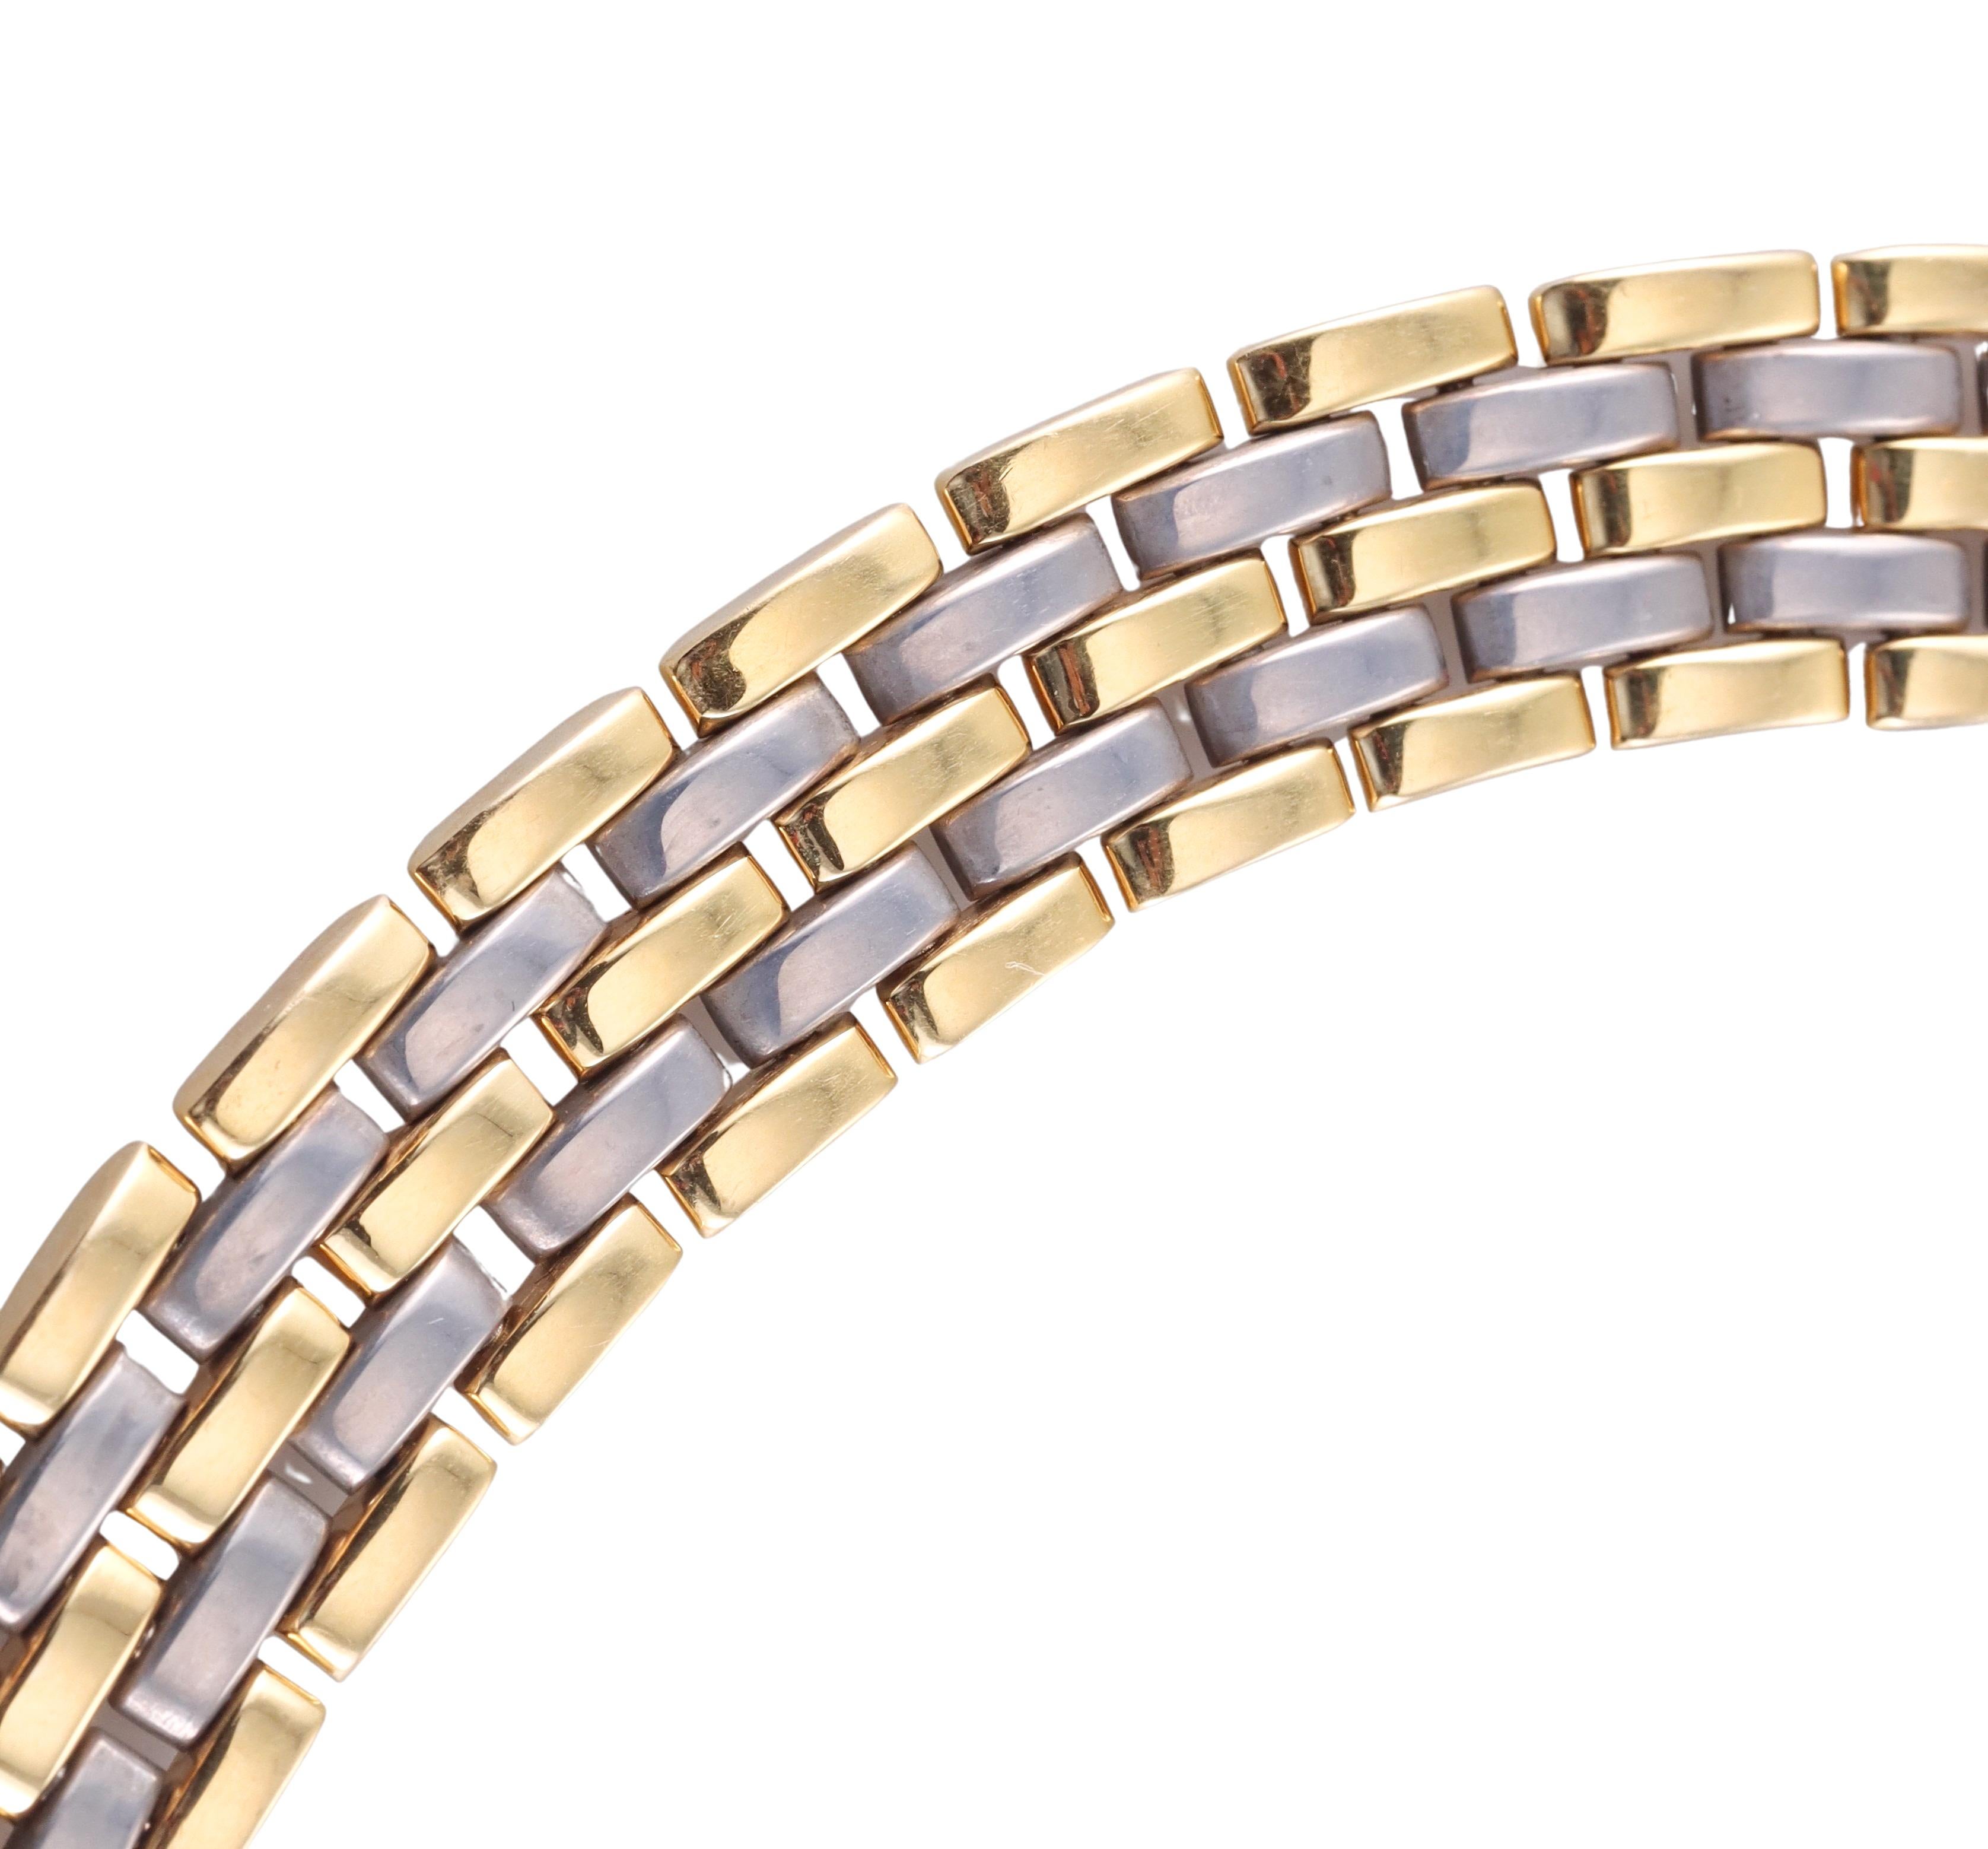 Classic Panthere necklace by Cartier, featuring five link row in 18k white and yellow alternating gold. Necklace is 16.5